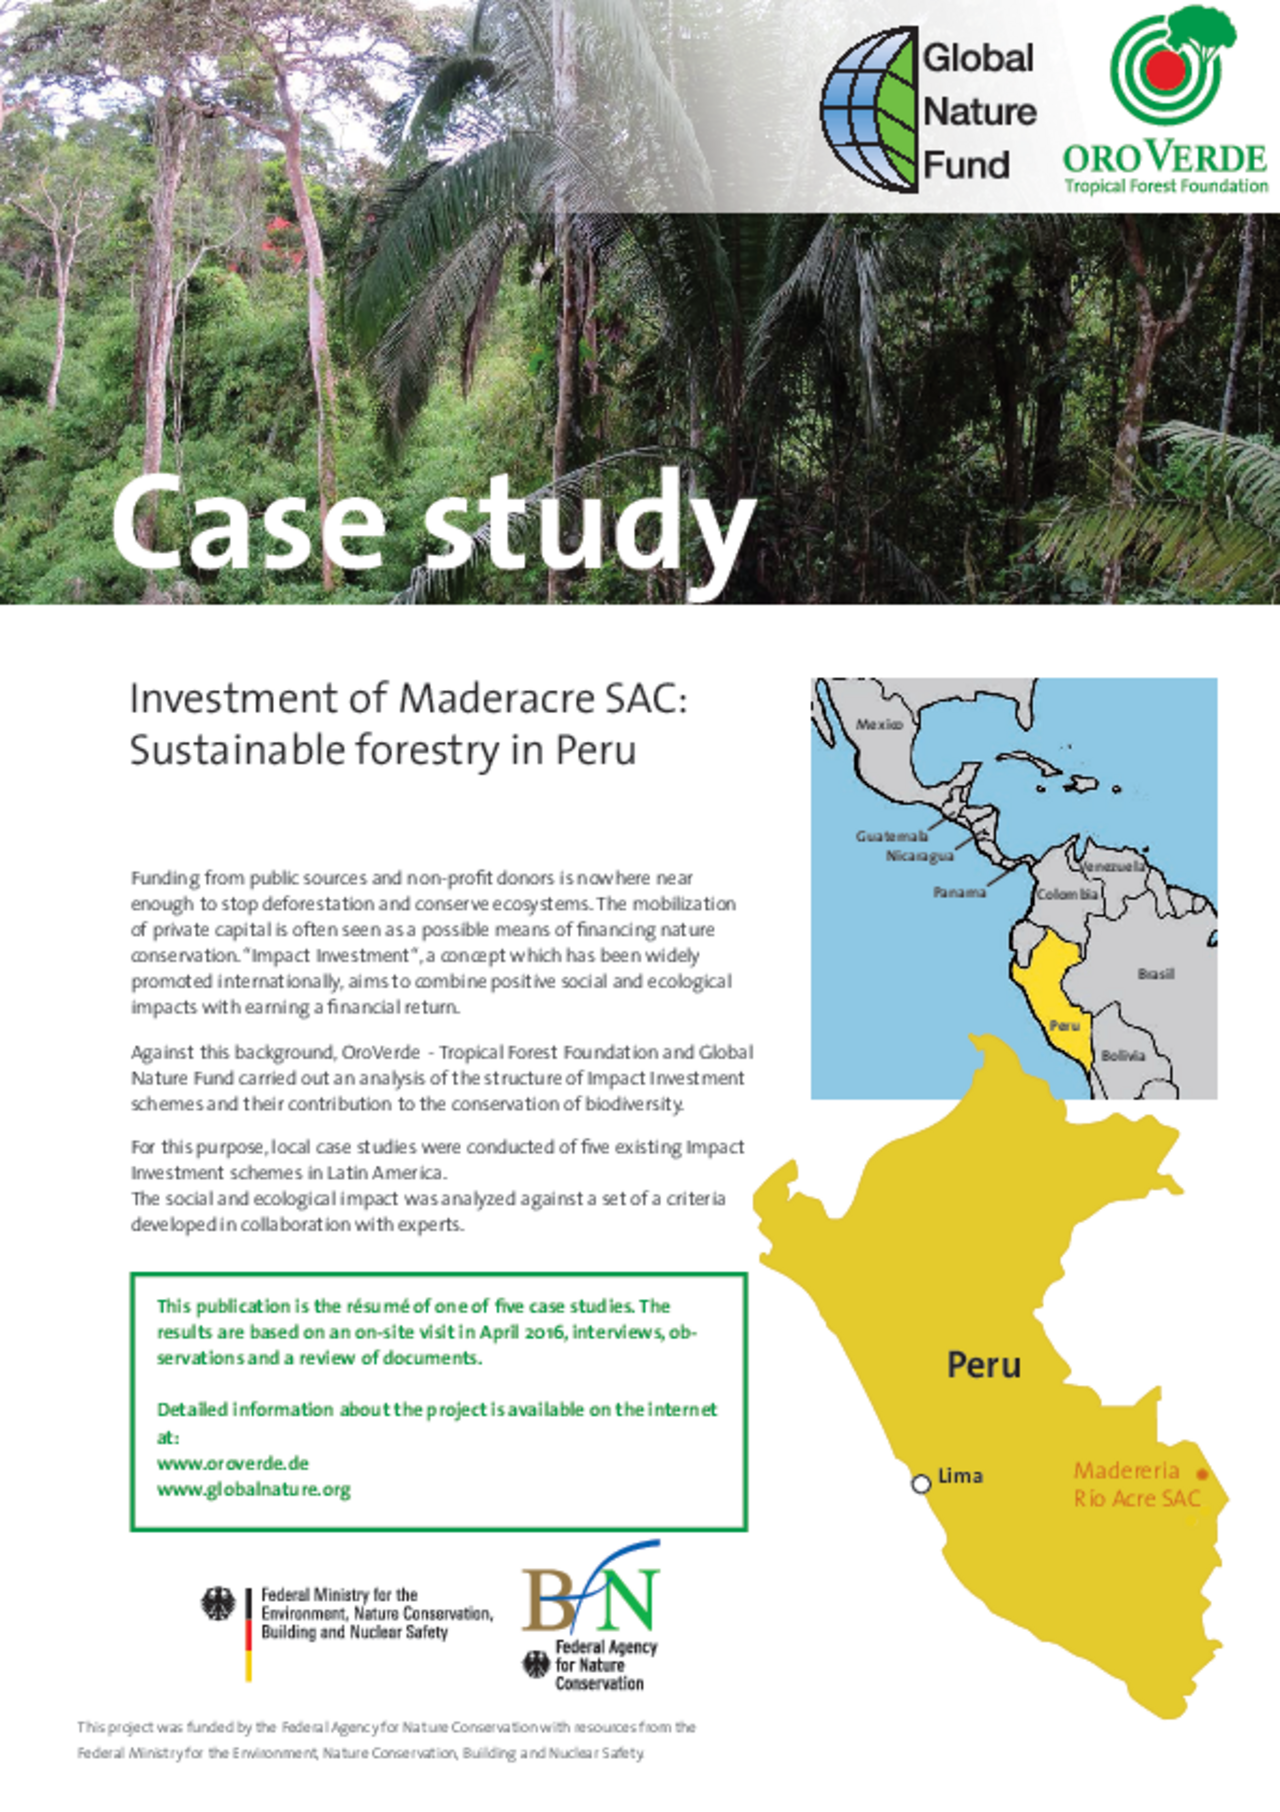 Case study: Sustainable forestry in Peru